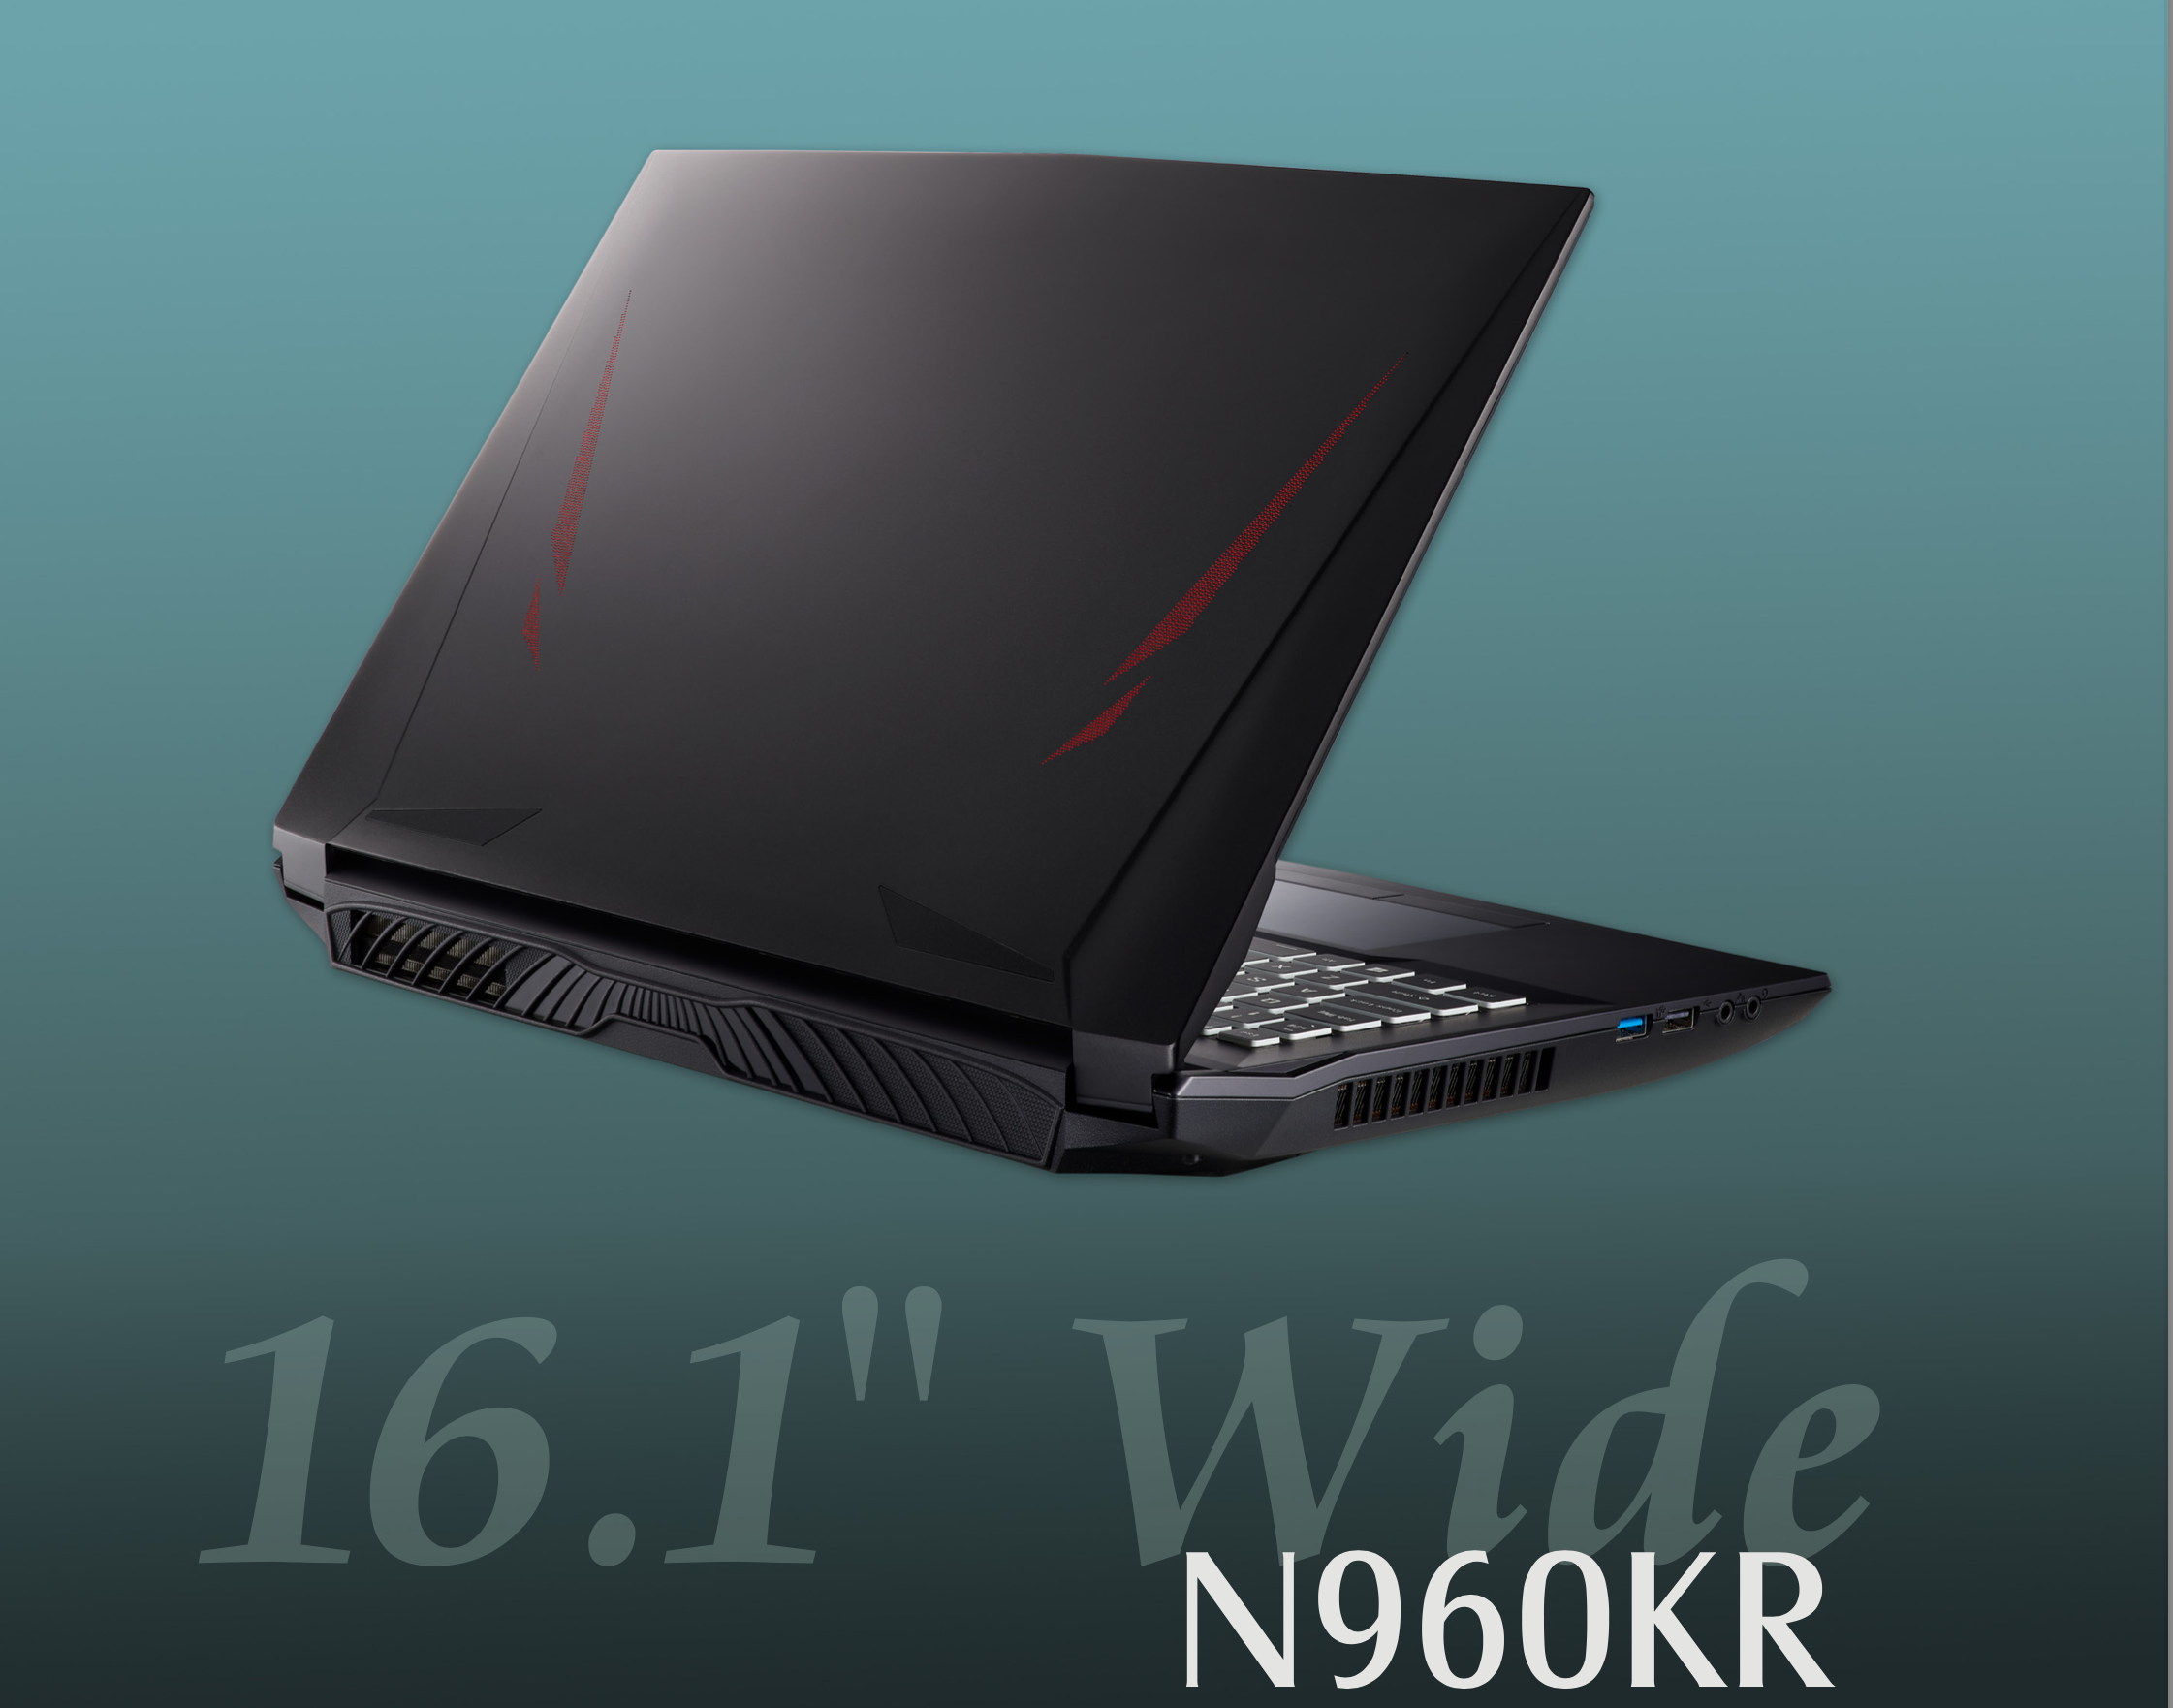 Cheap Gaming Laptop CLEVO N960KR with 8GB VRAM